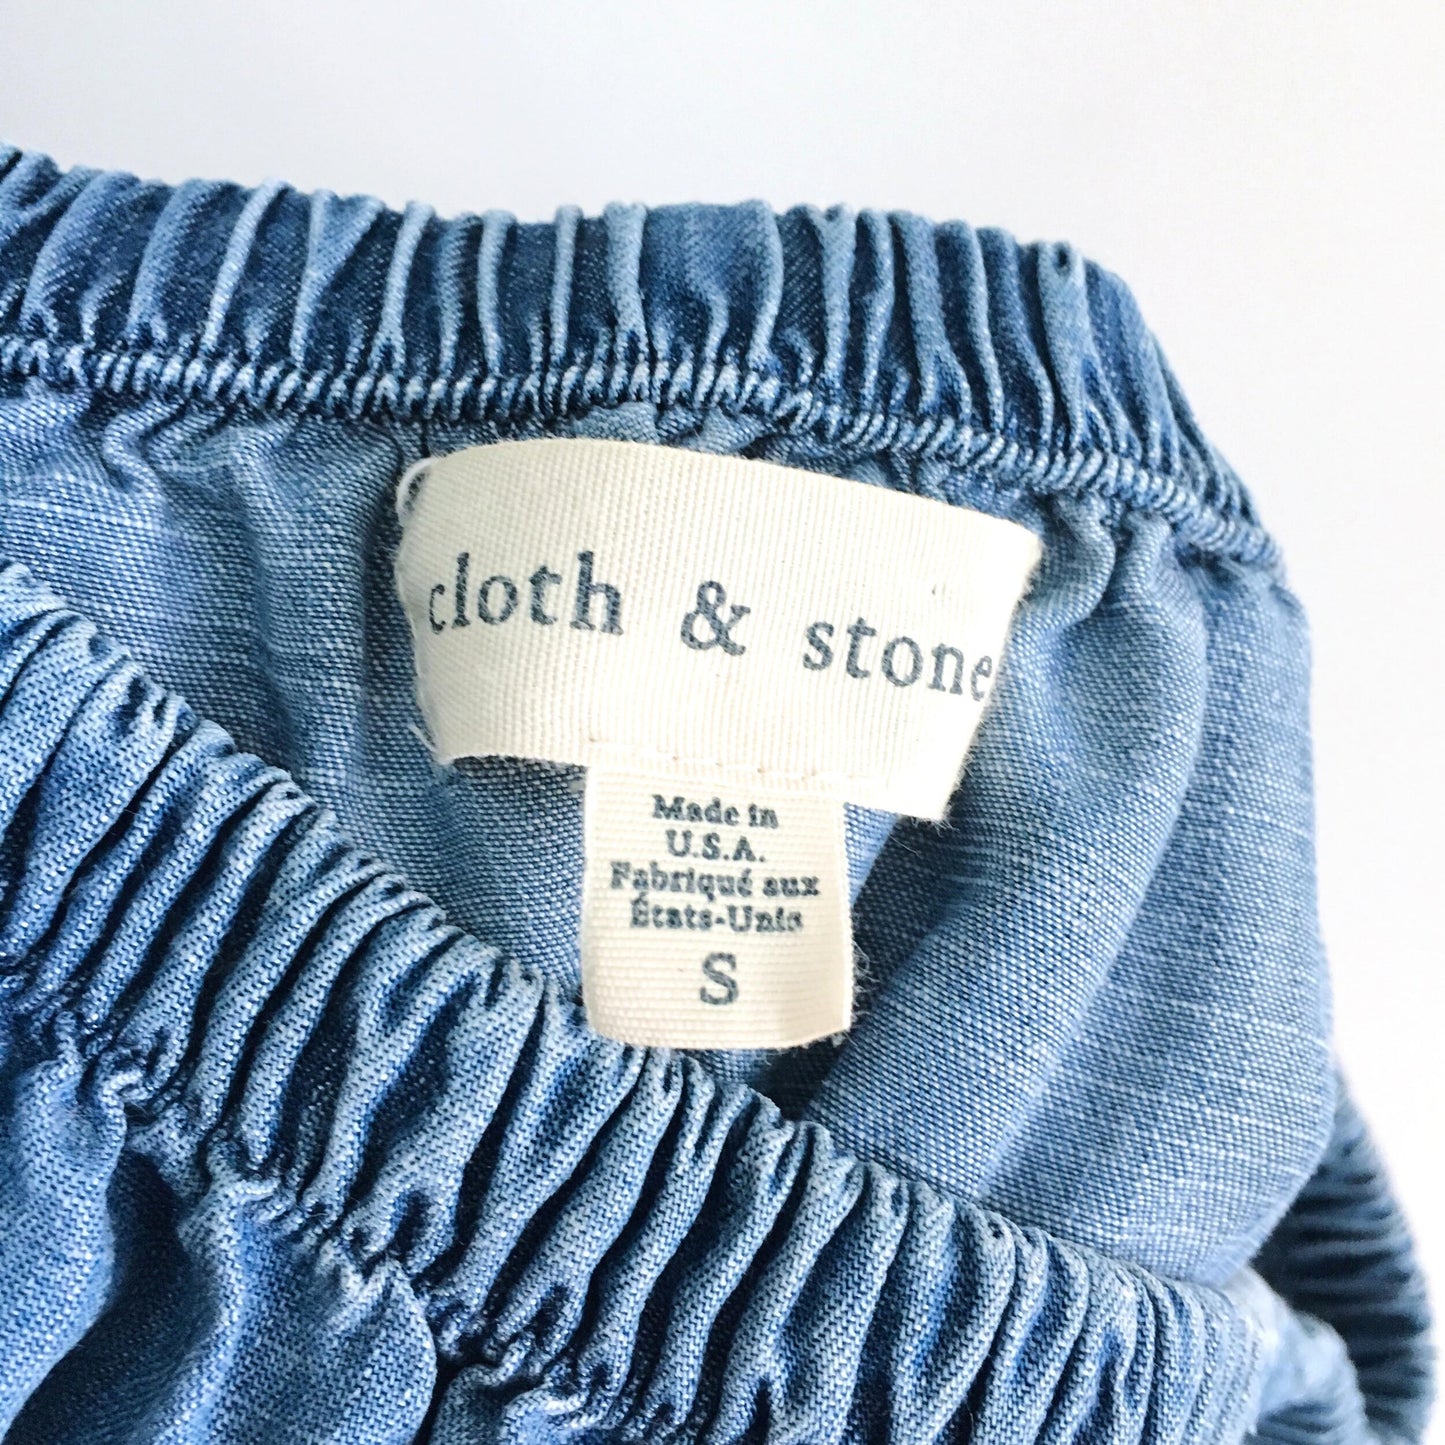 Cloth & Stone Chambray Off-Shoulder Top - size Small